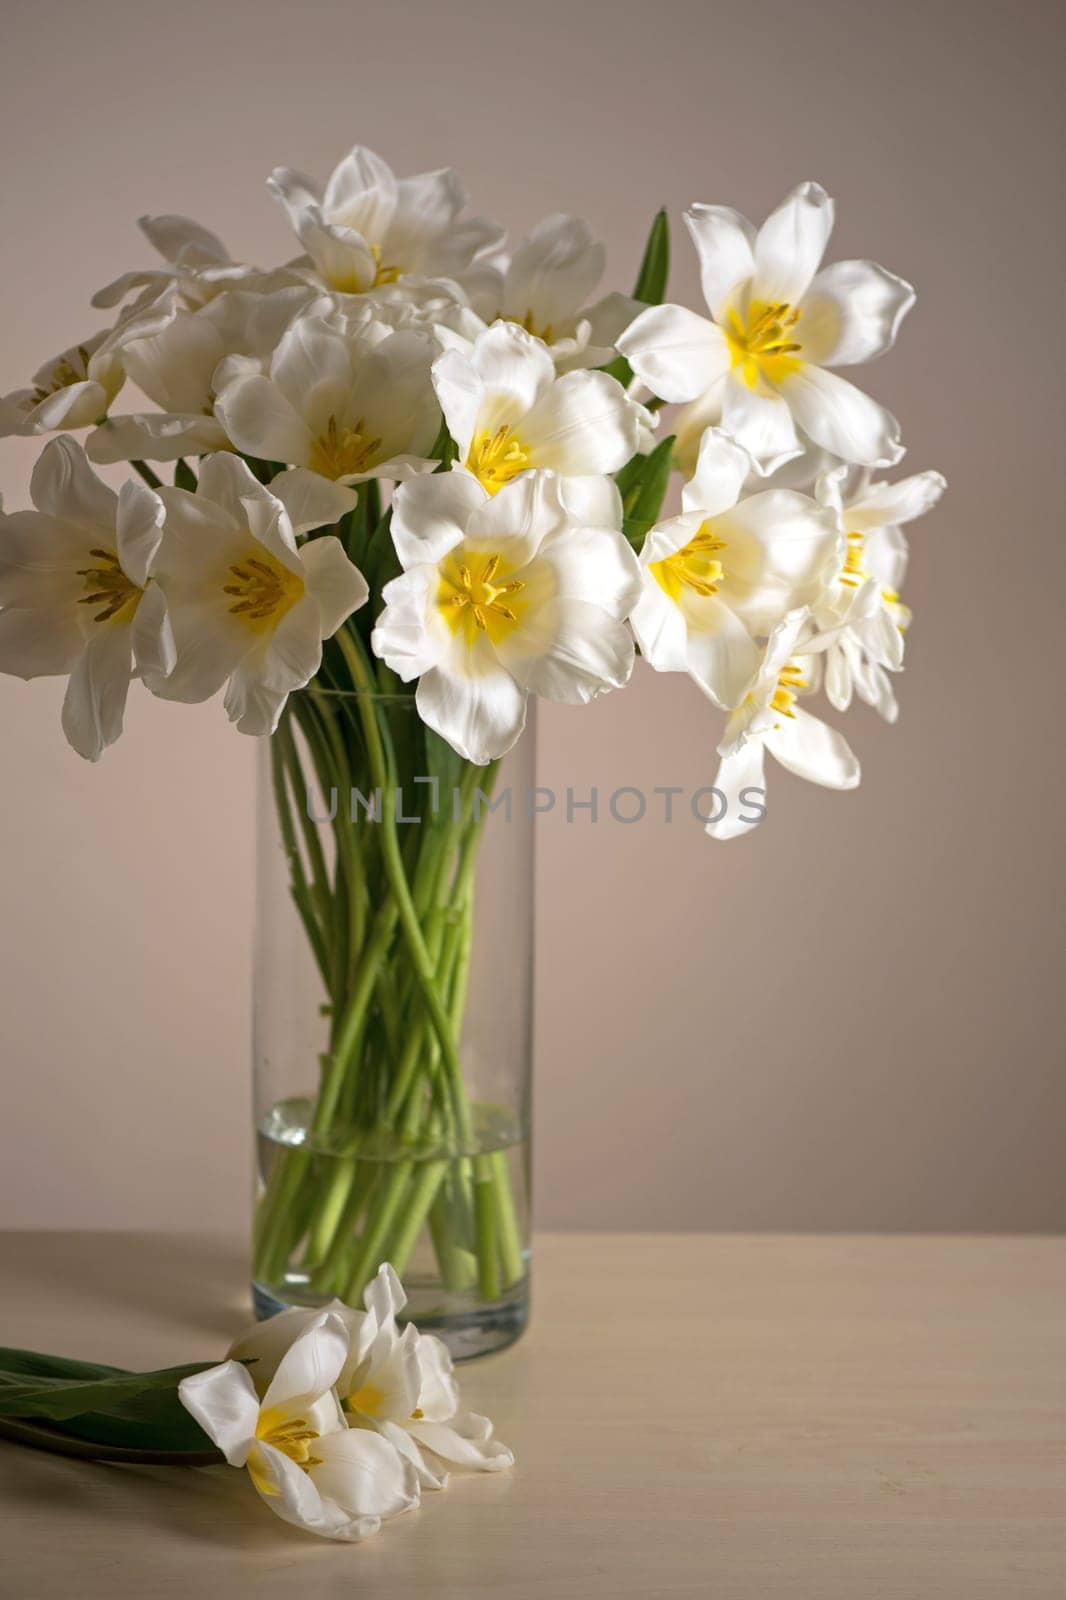 Bouquet of fresh white flowers in glass vase with green isolated flower. White spring tulips in a vase on a white wooden table